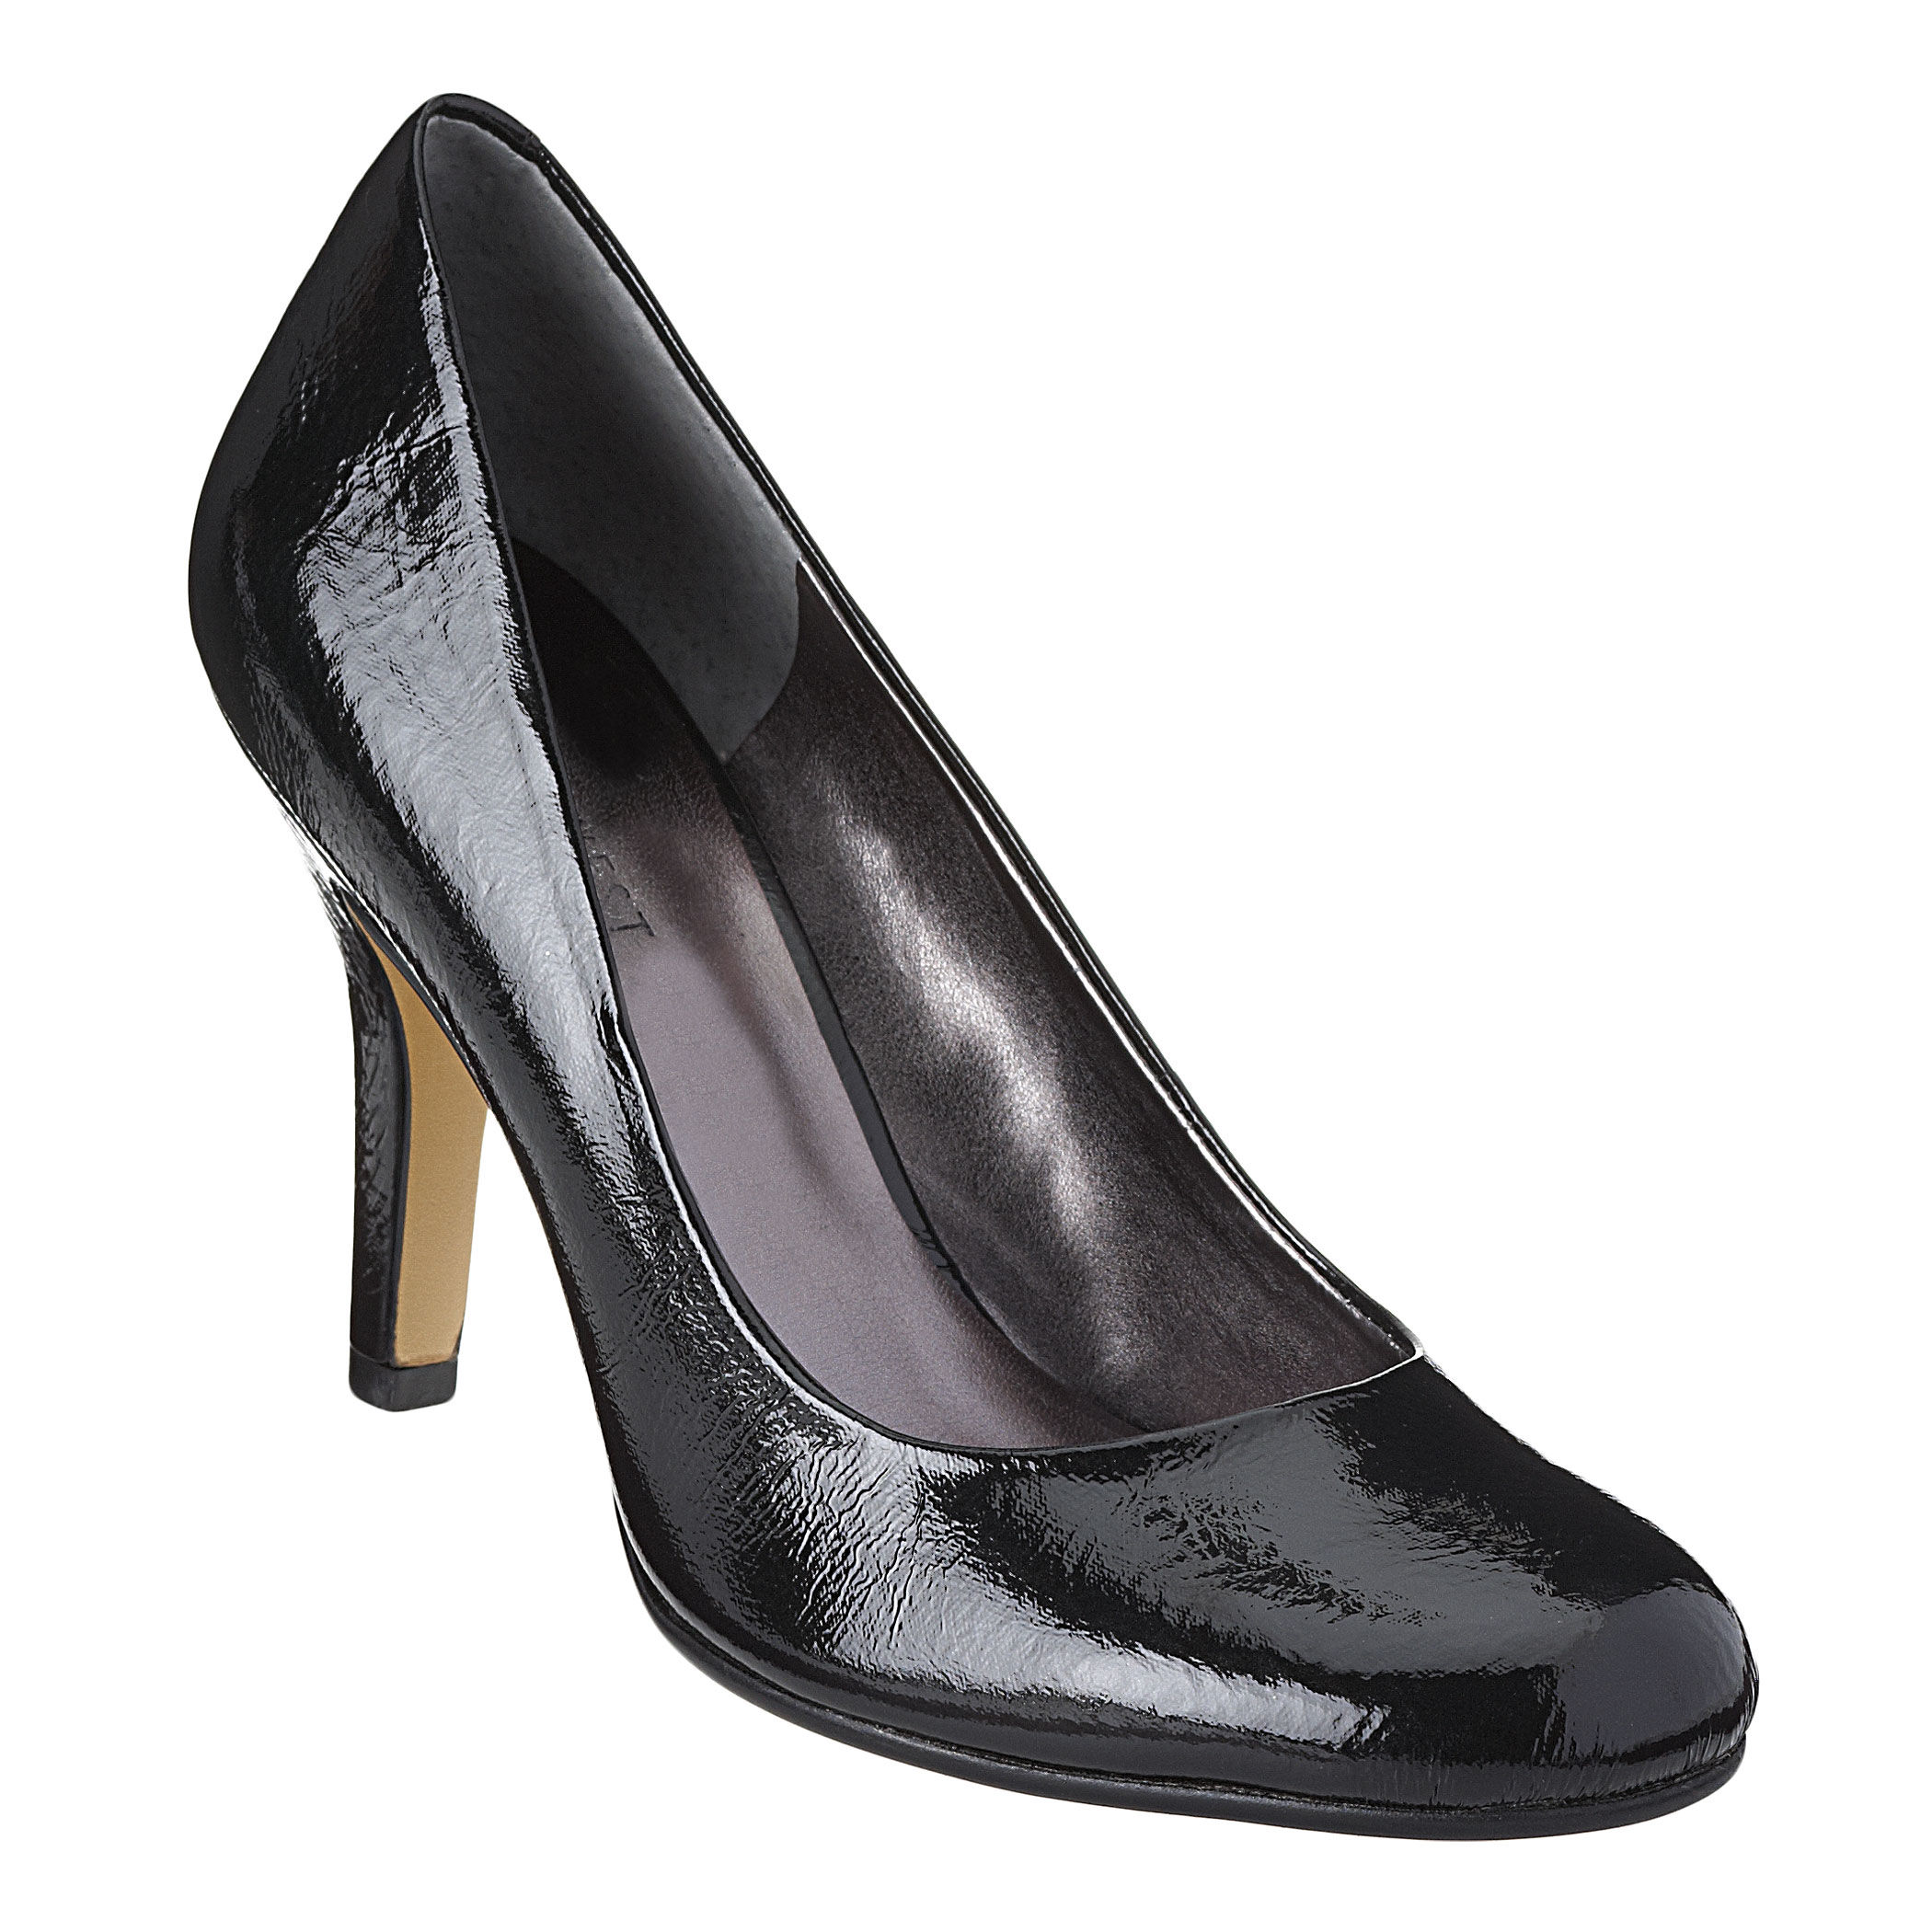 Nine West Synthetic Nw7arnull3 High Heel Court Shoes in Black Patent ...